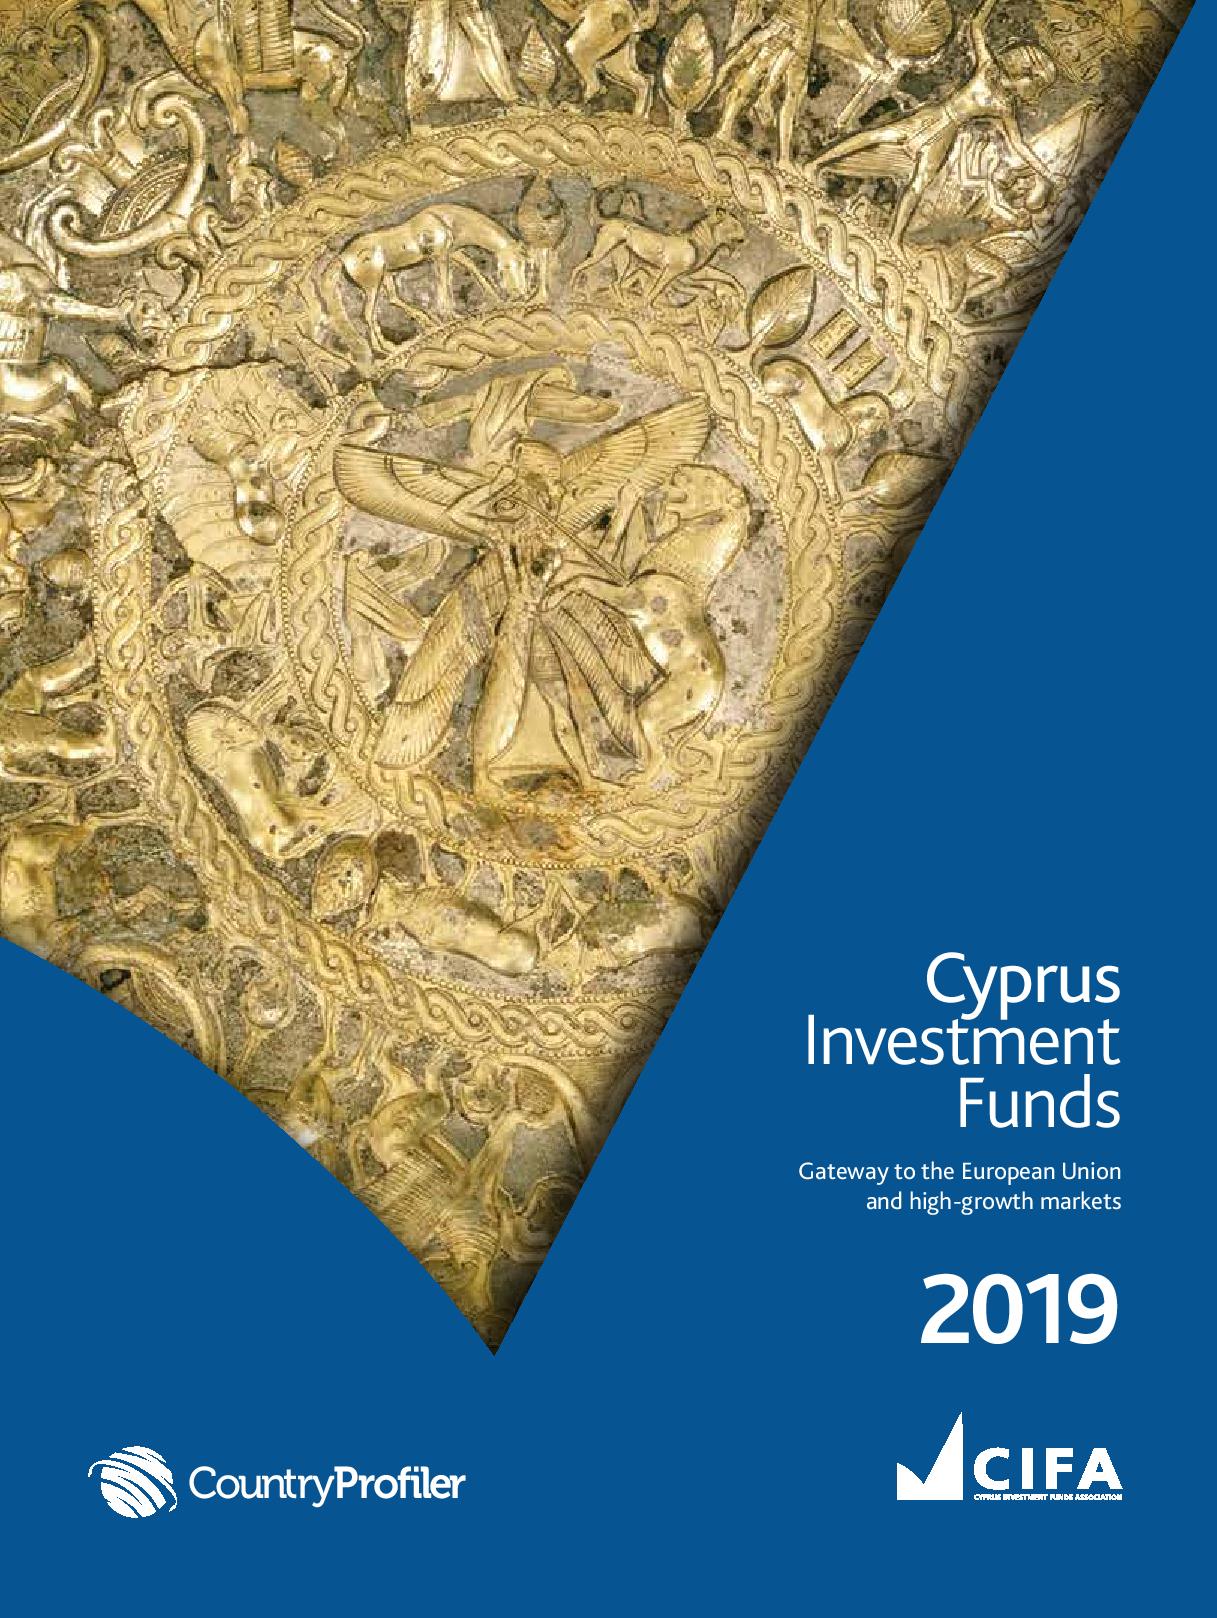 CIFA Investment Funds Guide 2019